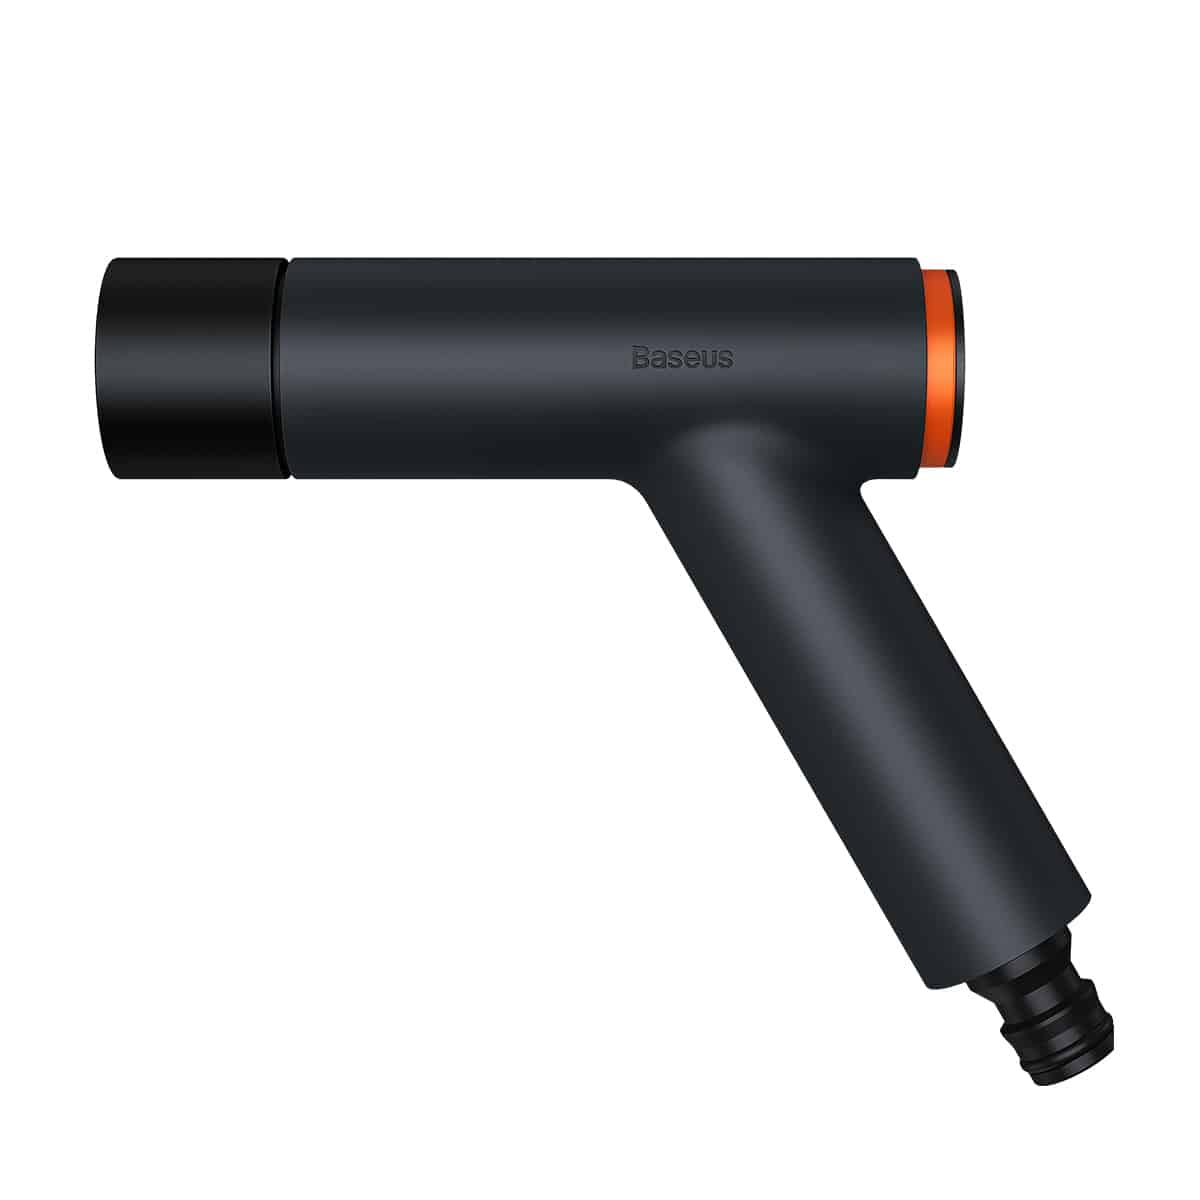 Baseus GF3 Car Wash Spray Nozzle Dark Gray (With a 7.5m telescopic pipe+a universal joint)